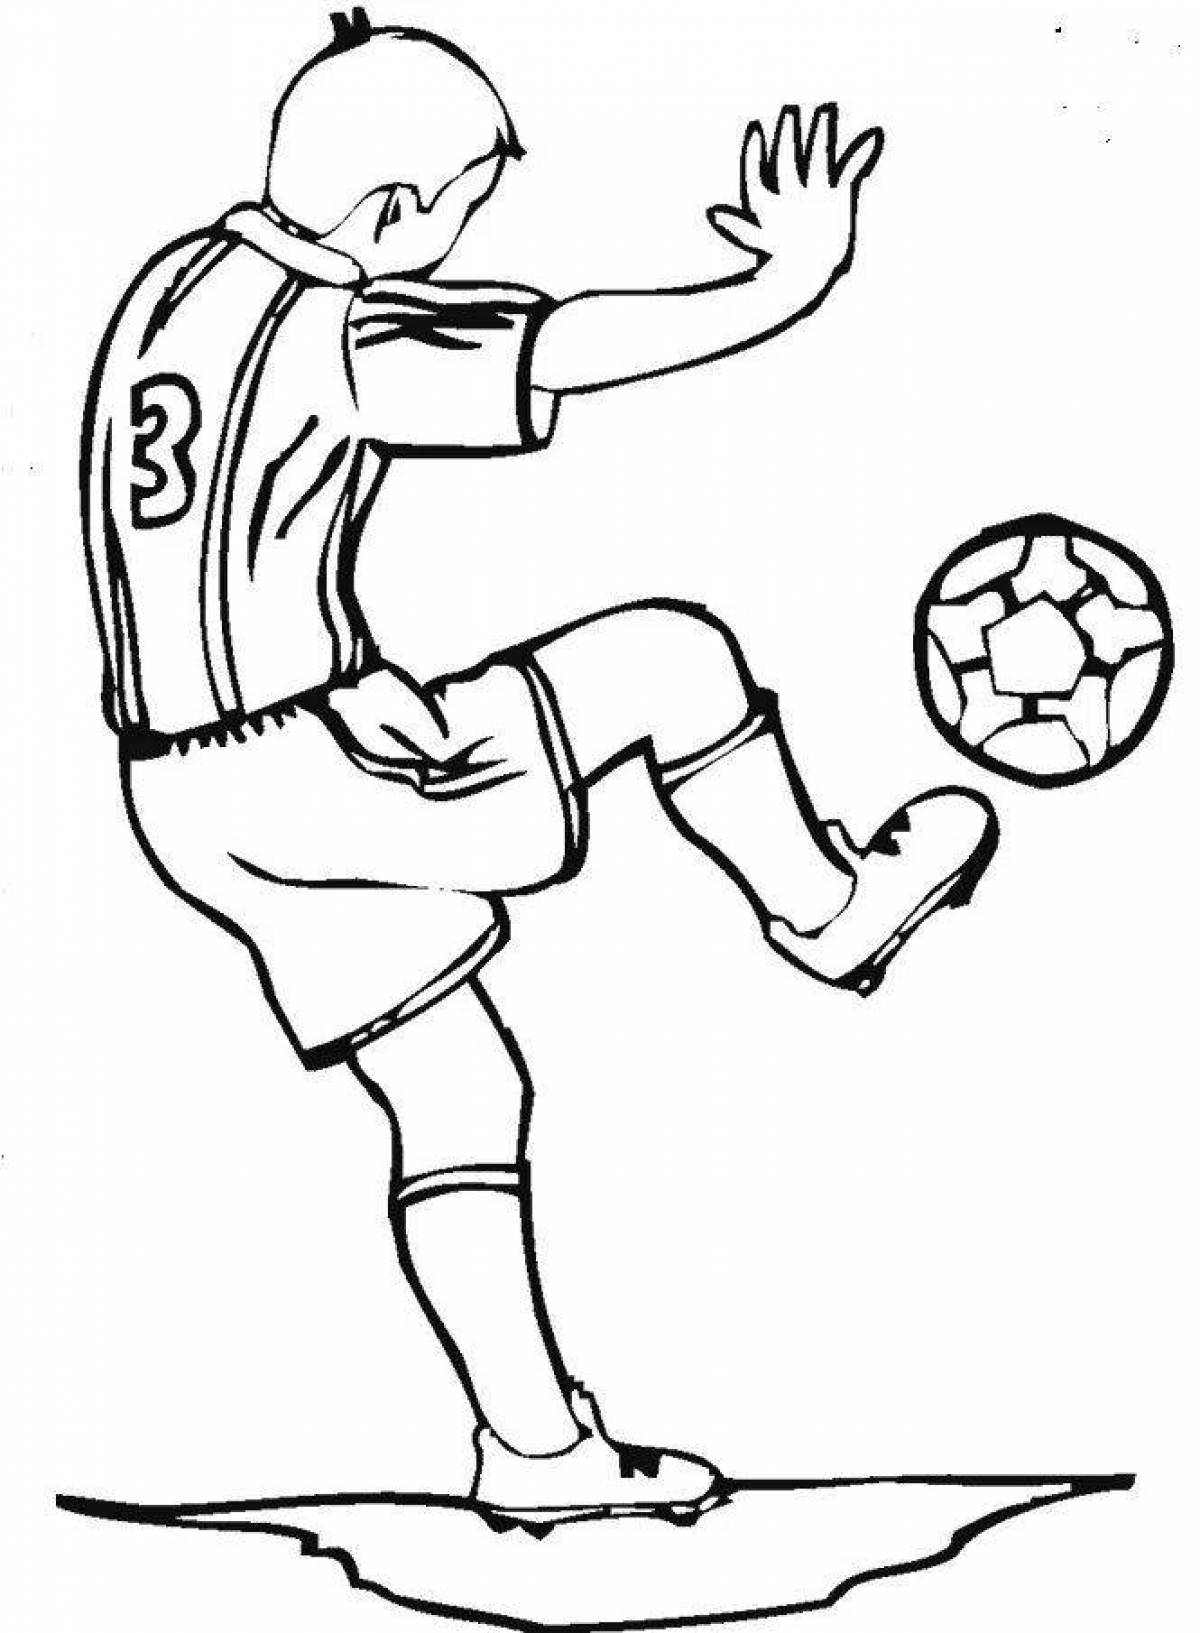 Exquisite soccer player coloring book for kids